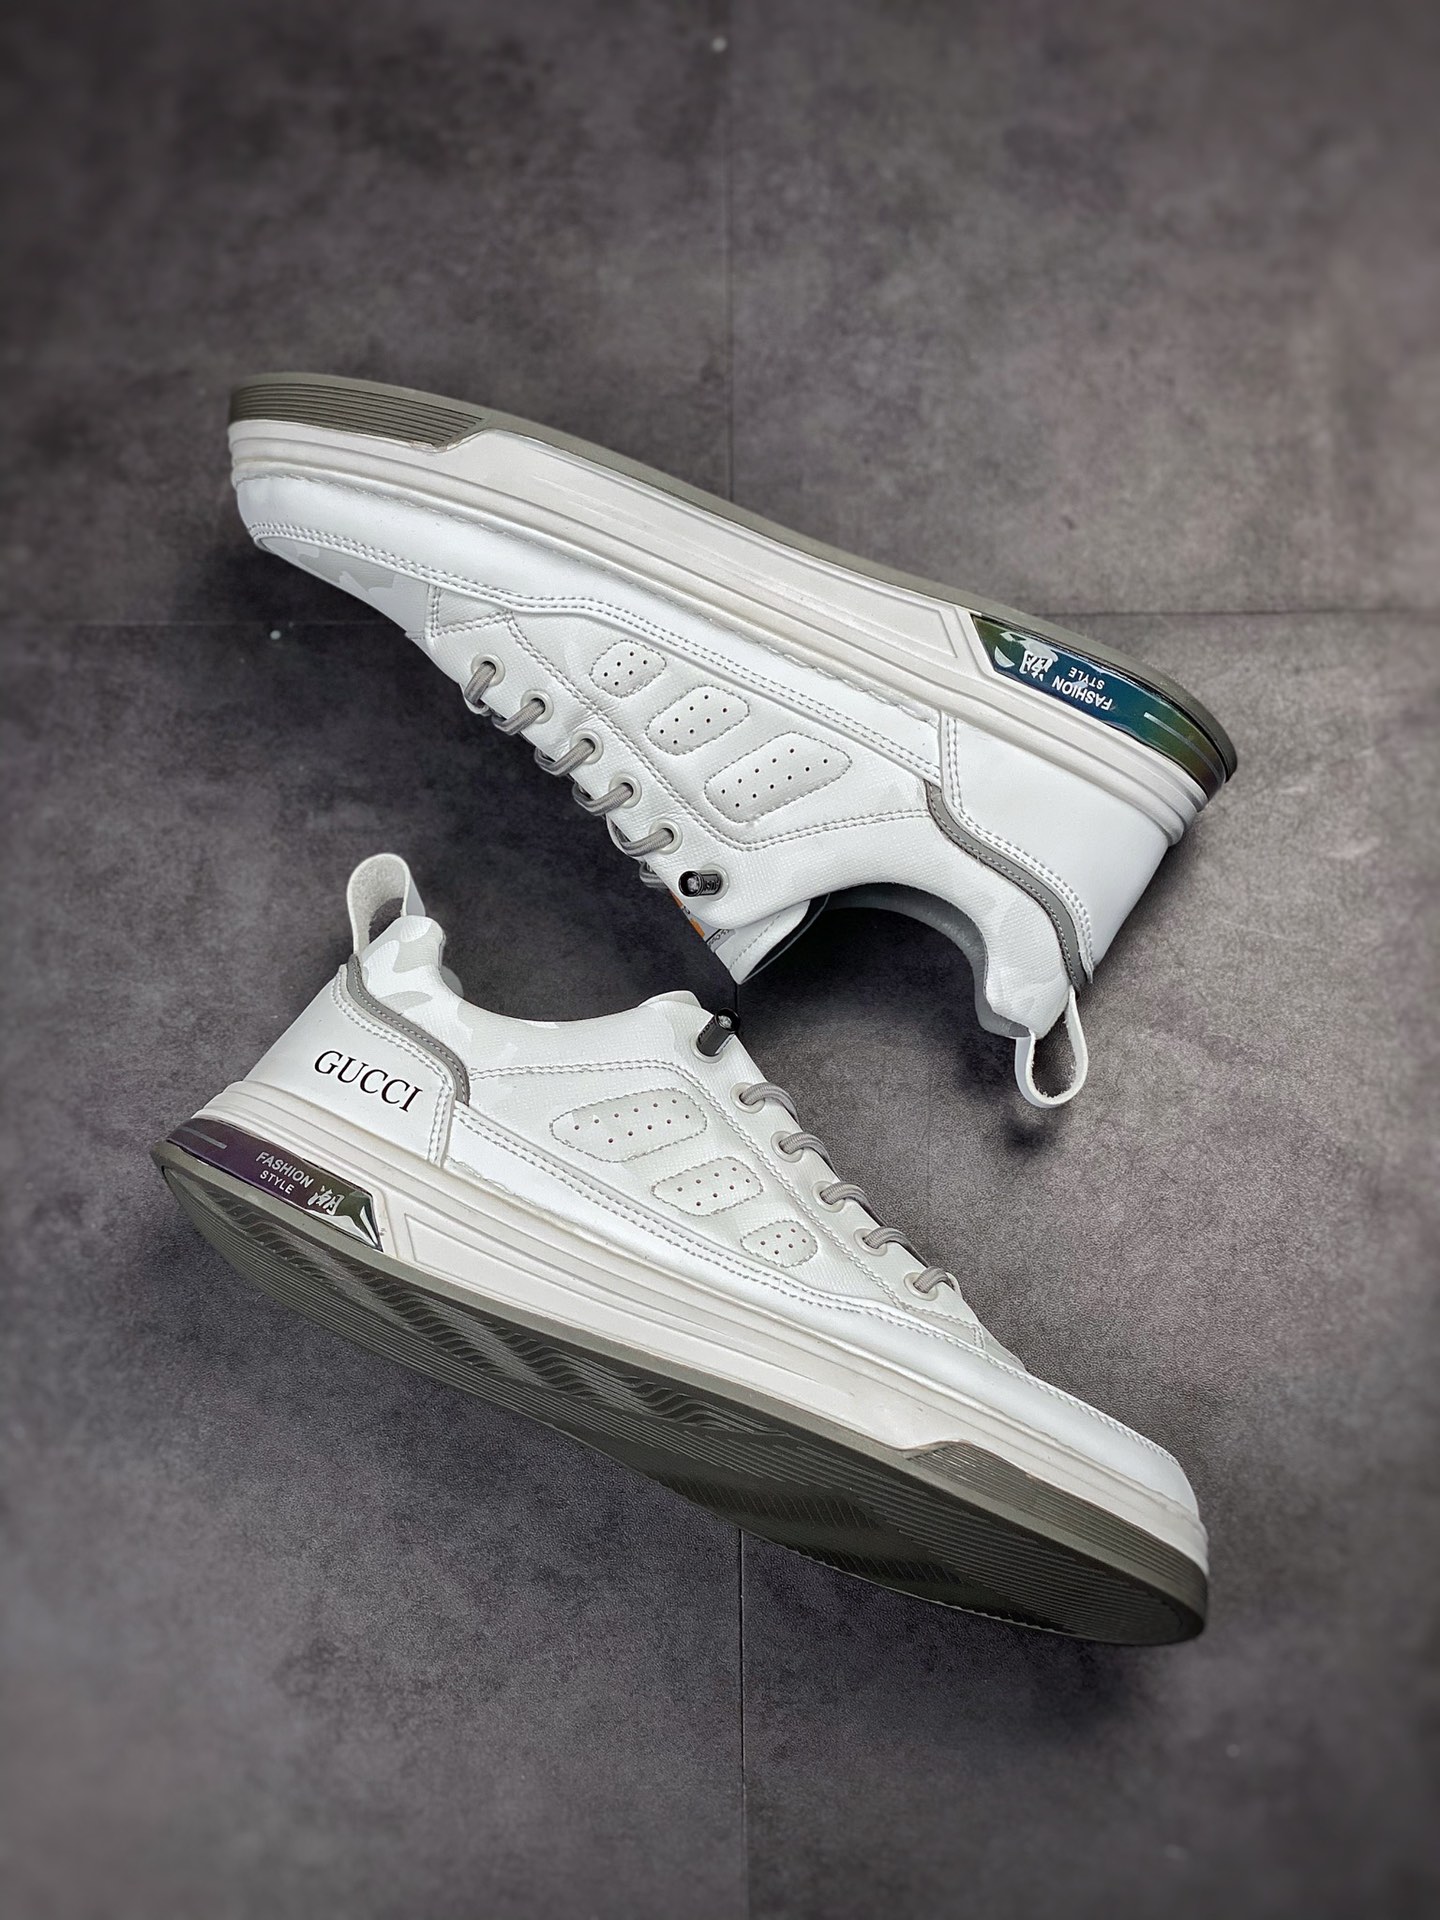 Gucci sports and leisure trend sneakers series